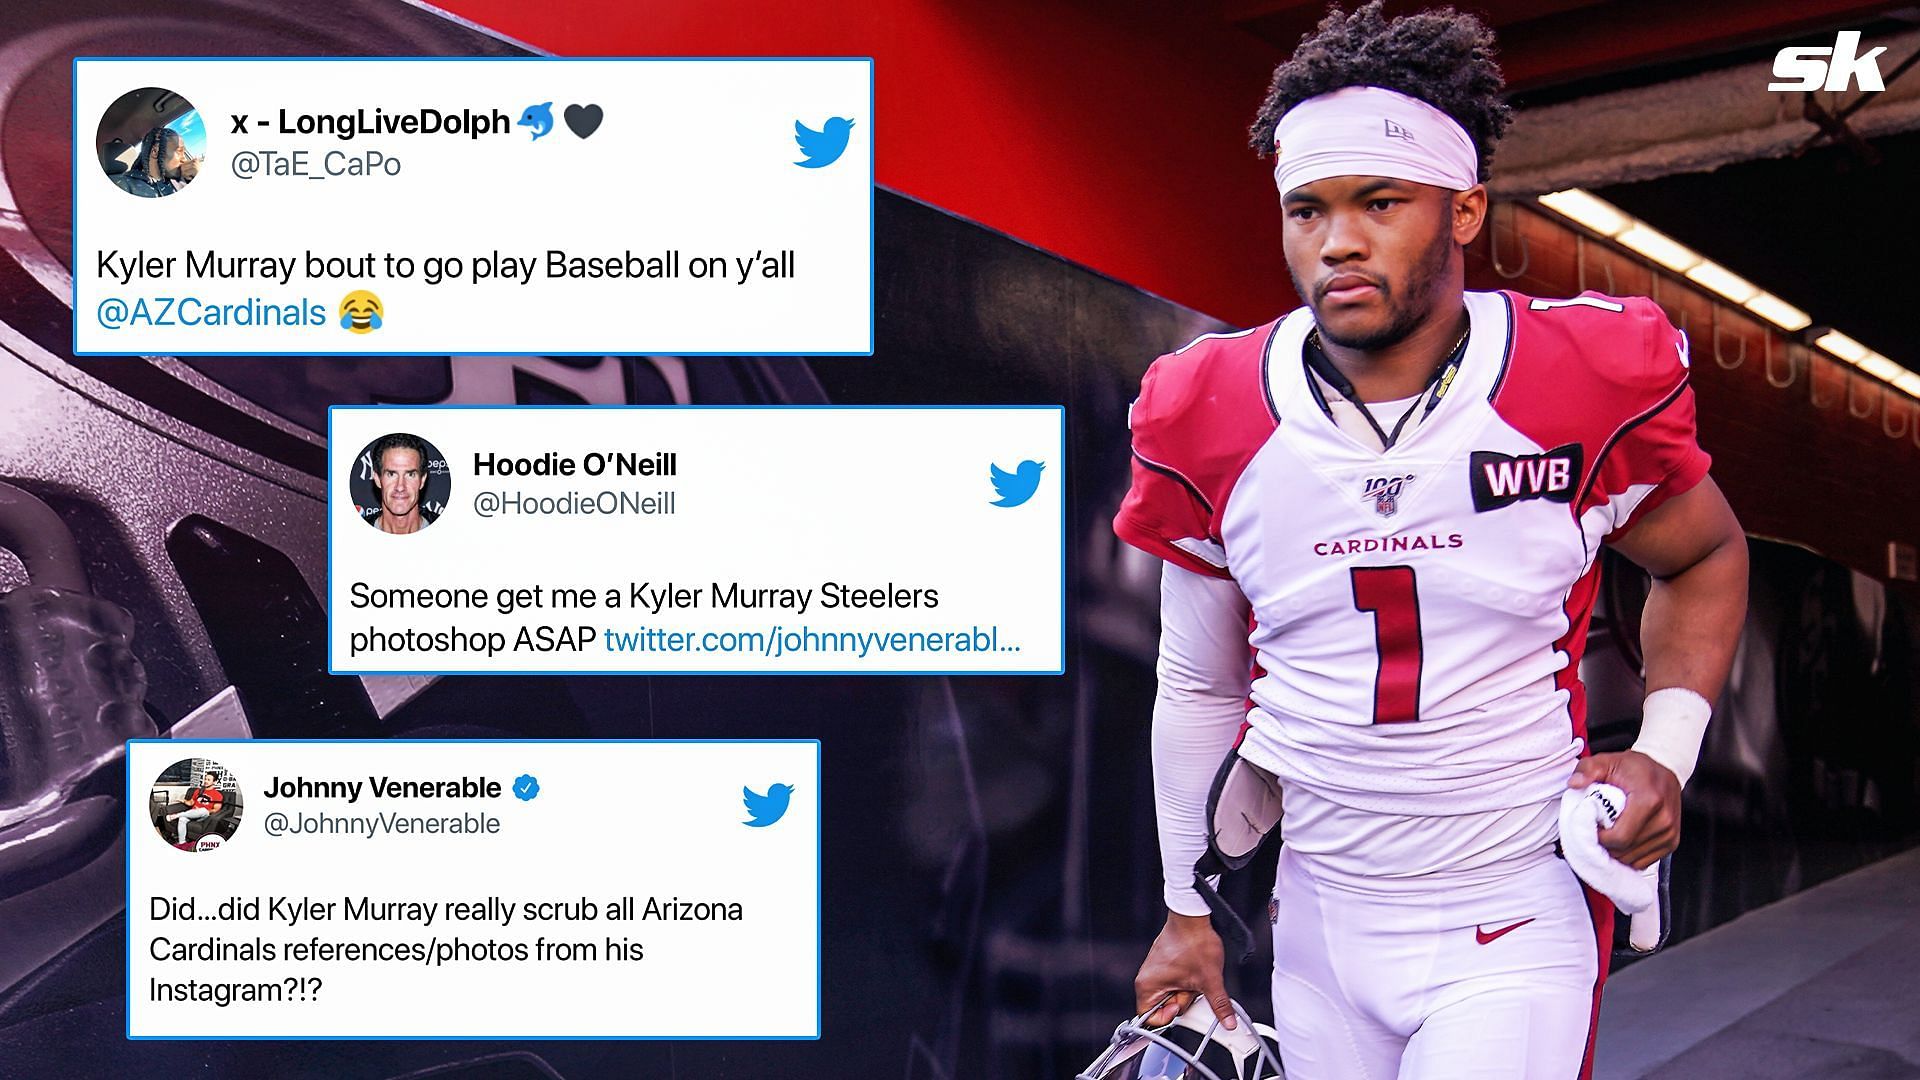 Kyler Murray's Pro Bowl experience could have led to social media